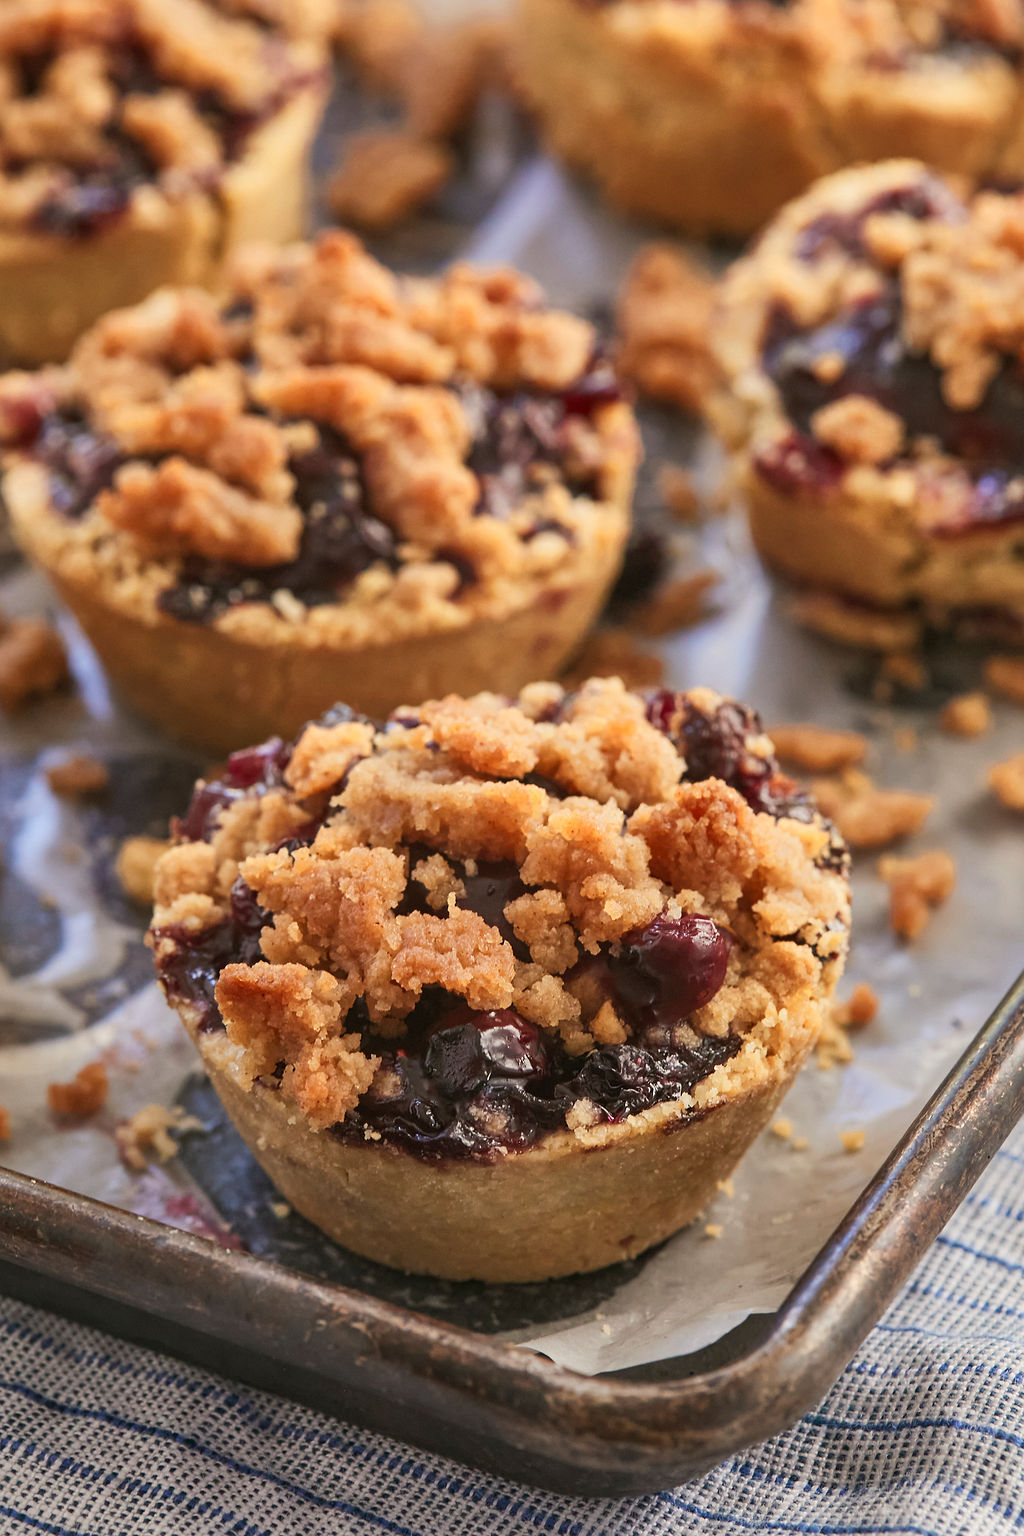 Mini blueberry pies with a cinnamon crumb topping on a baking pan.